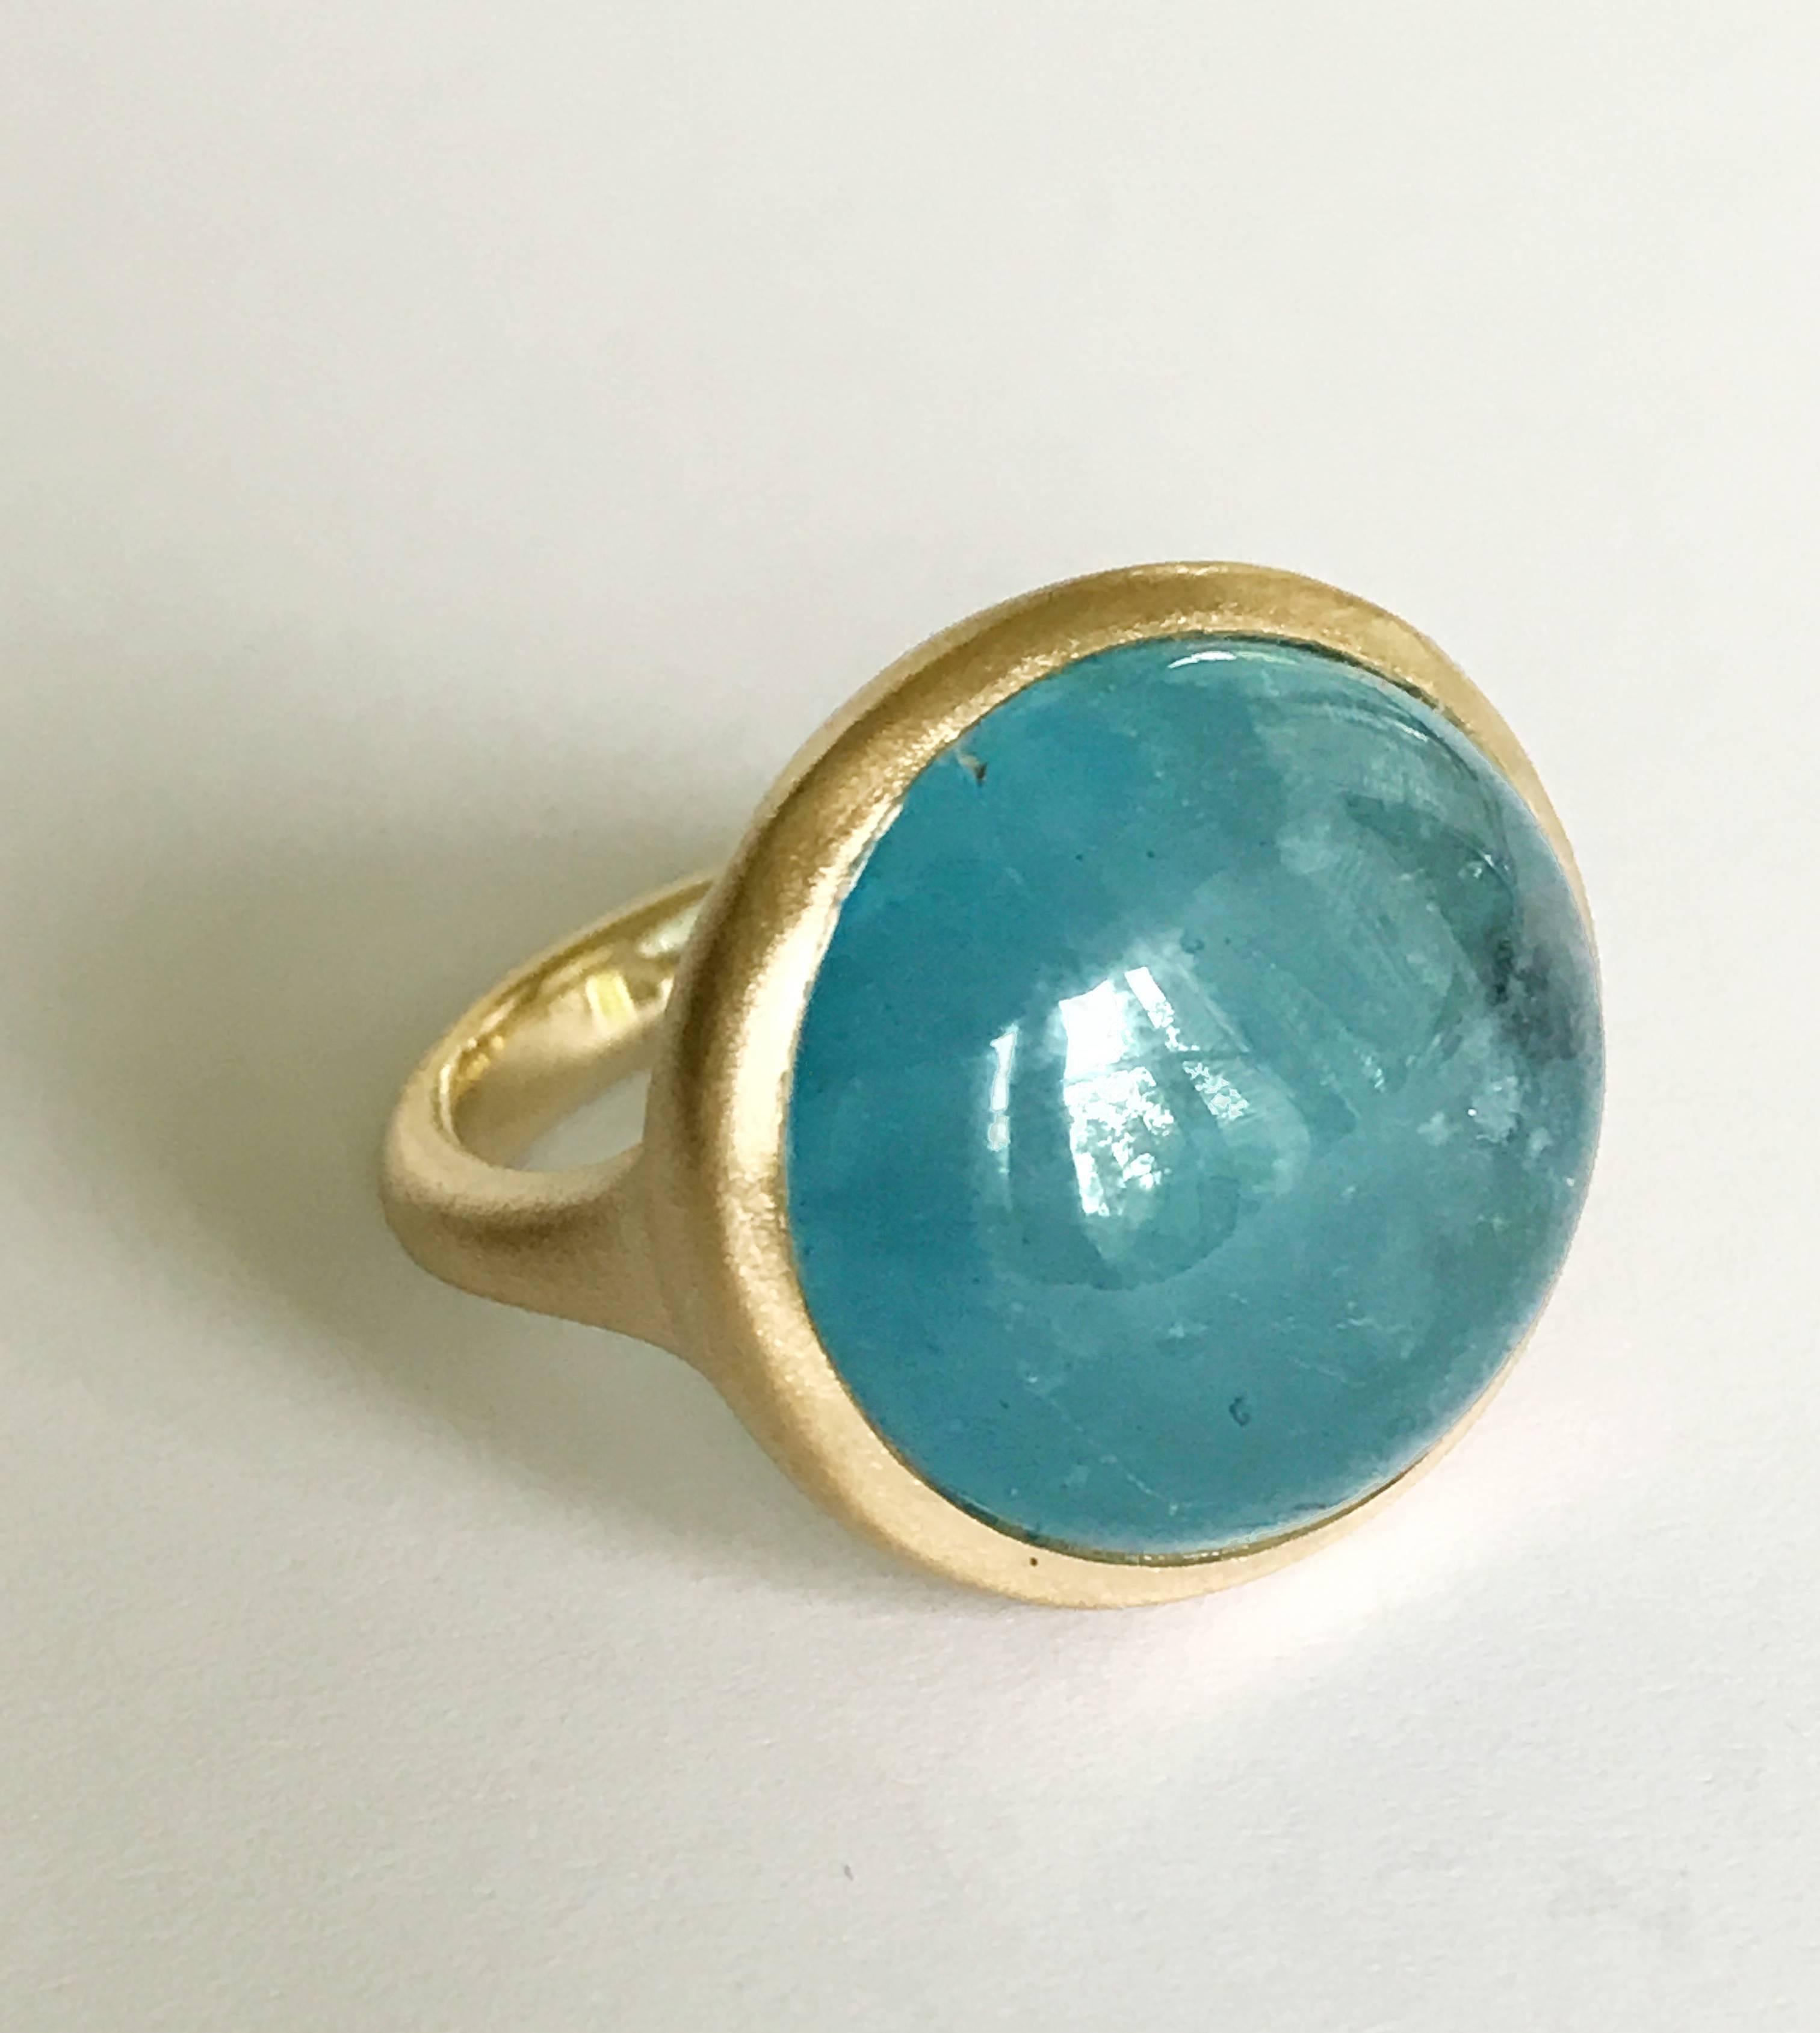 Dalben design One of a Kind 18k yellow gold matte finishing ring with a slightly foggy 21,5 carat bezel-set round cabochon cut Aquamarine.  
Ring size 6 3/4 - EU 54 re-sizable to most finger sizes.  
Bezel stone dimensions :  width 21 mm  height